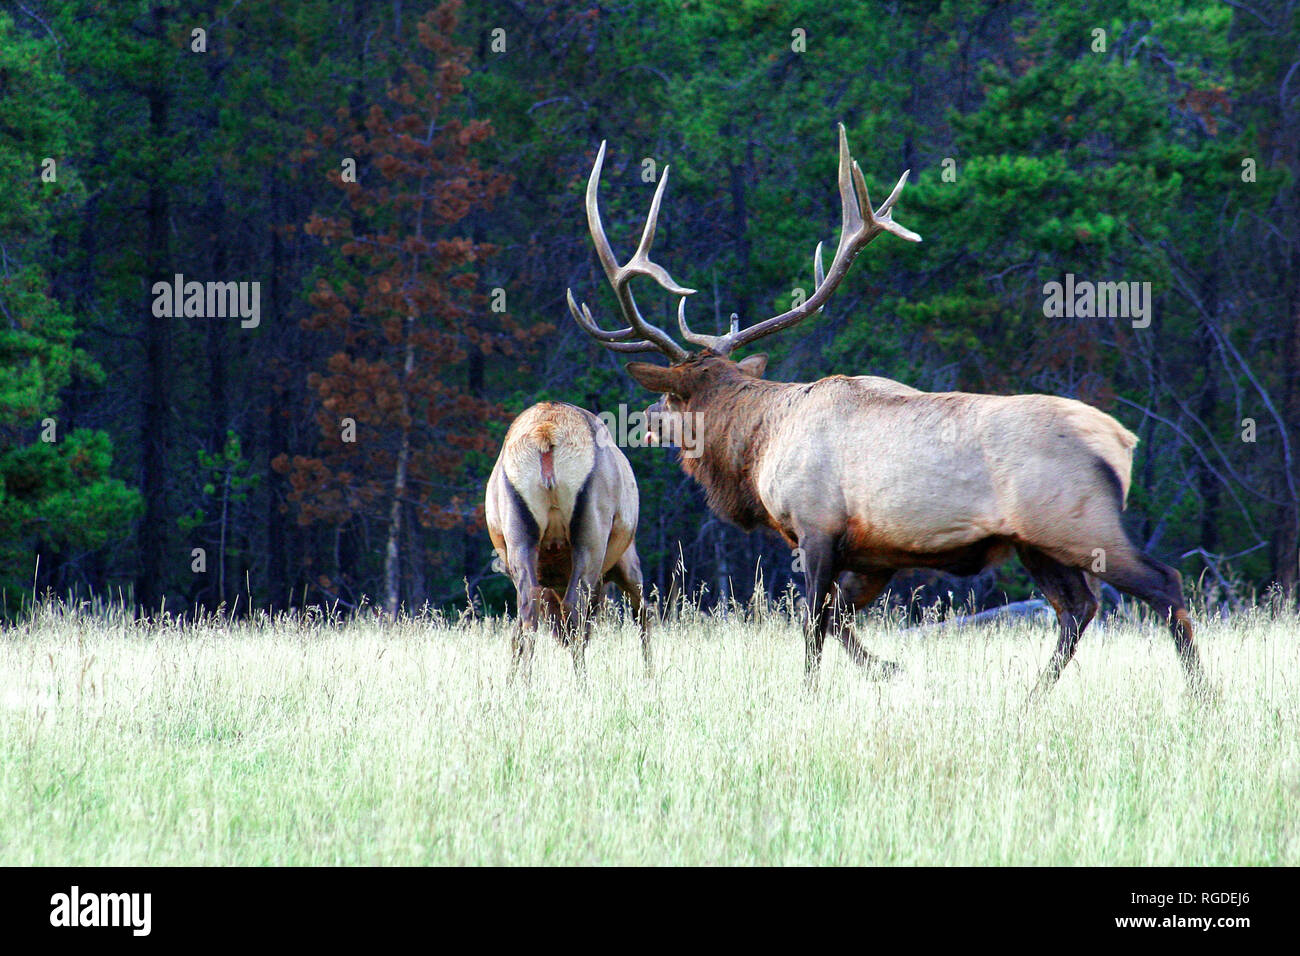 38,618.01066 anxious and excited large adult elk herd bull in rut posturing and aggressively trailing after cow that is about ready to be bred, breed Stock Photo